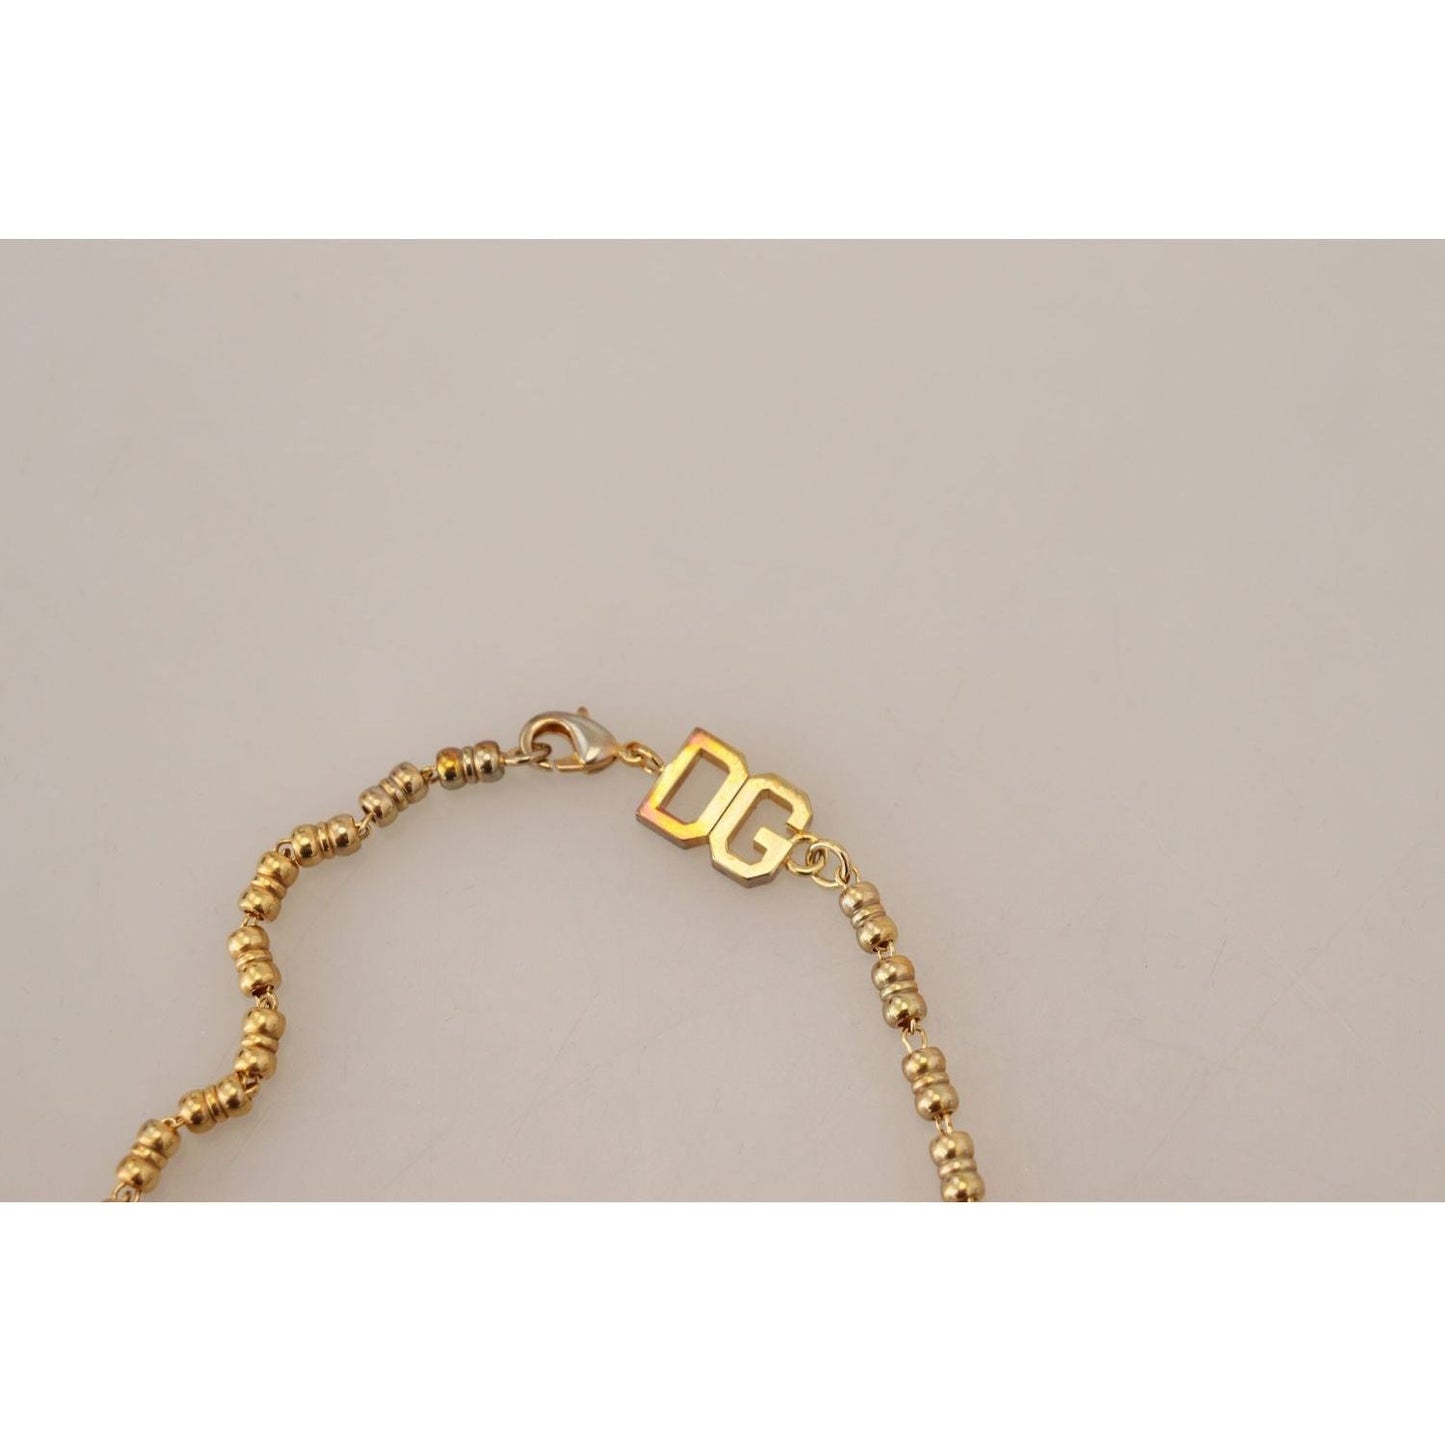 Dolce & Gabbana Elegant Gold Charm Chain Necklace gold-brass-chain-super-pig-pendant-logo-necklace IMG_1568-1-scaled-8353e26e-aaa.jpg